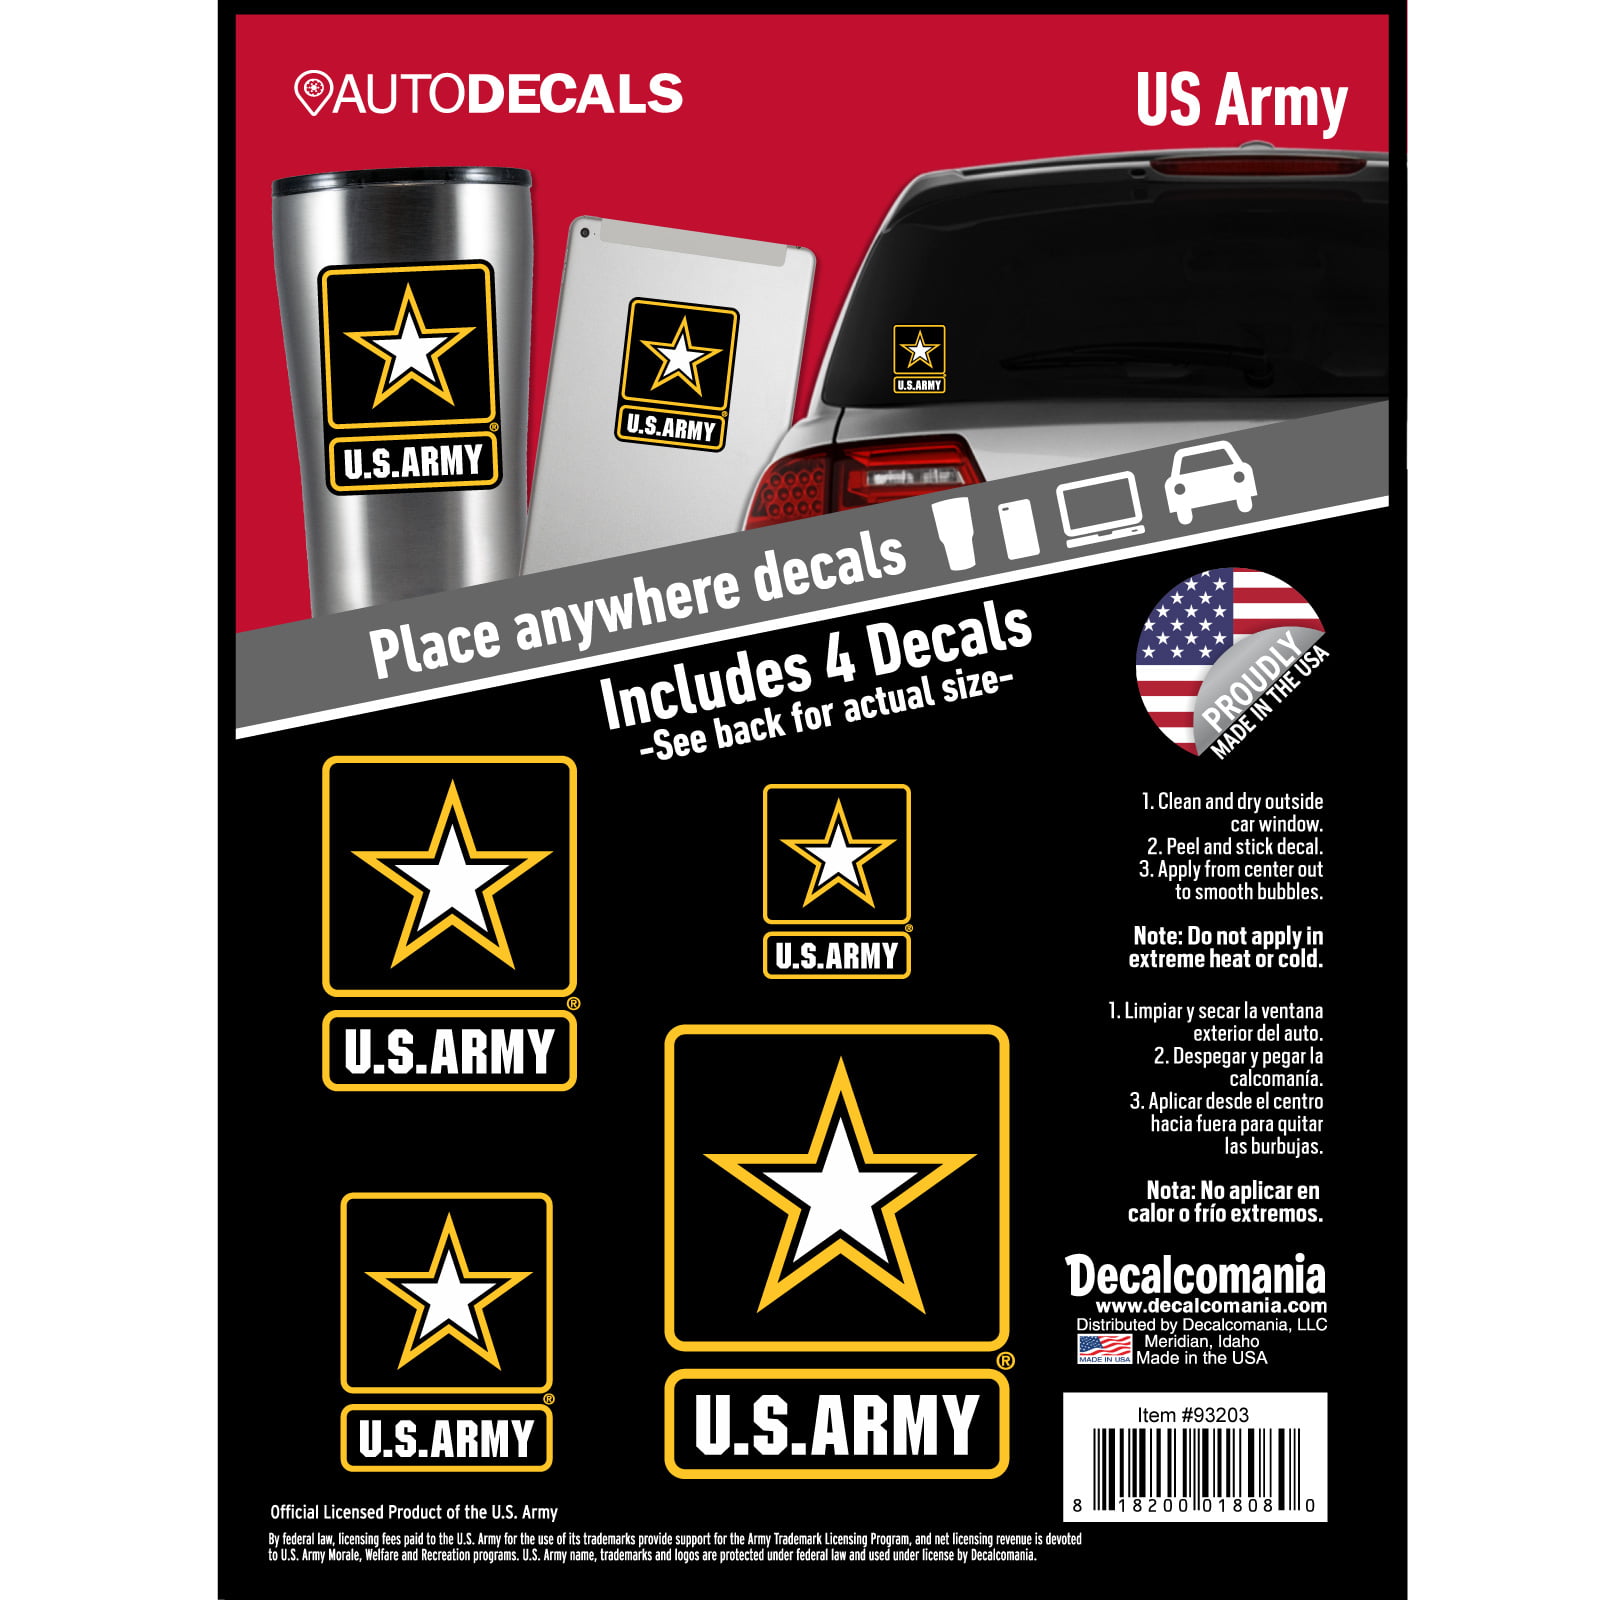 Proud Father or a US Army 3.8" Sticker Decal 'Officially Licensed'